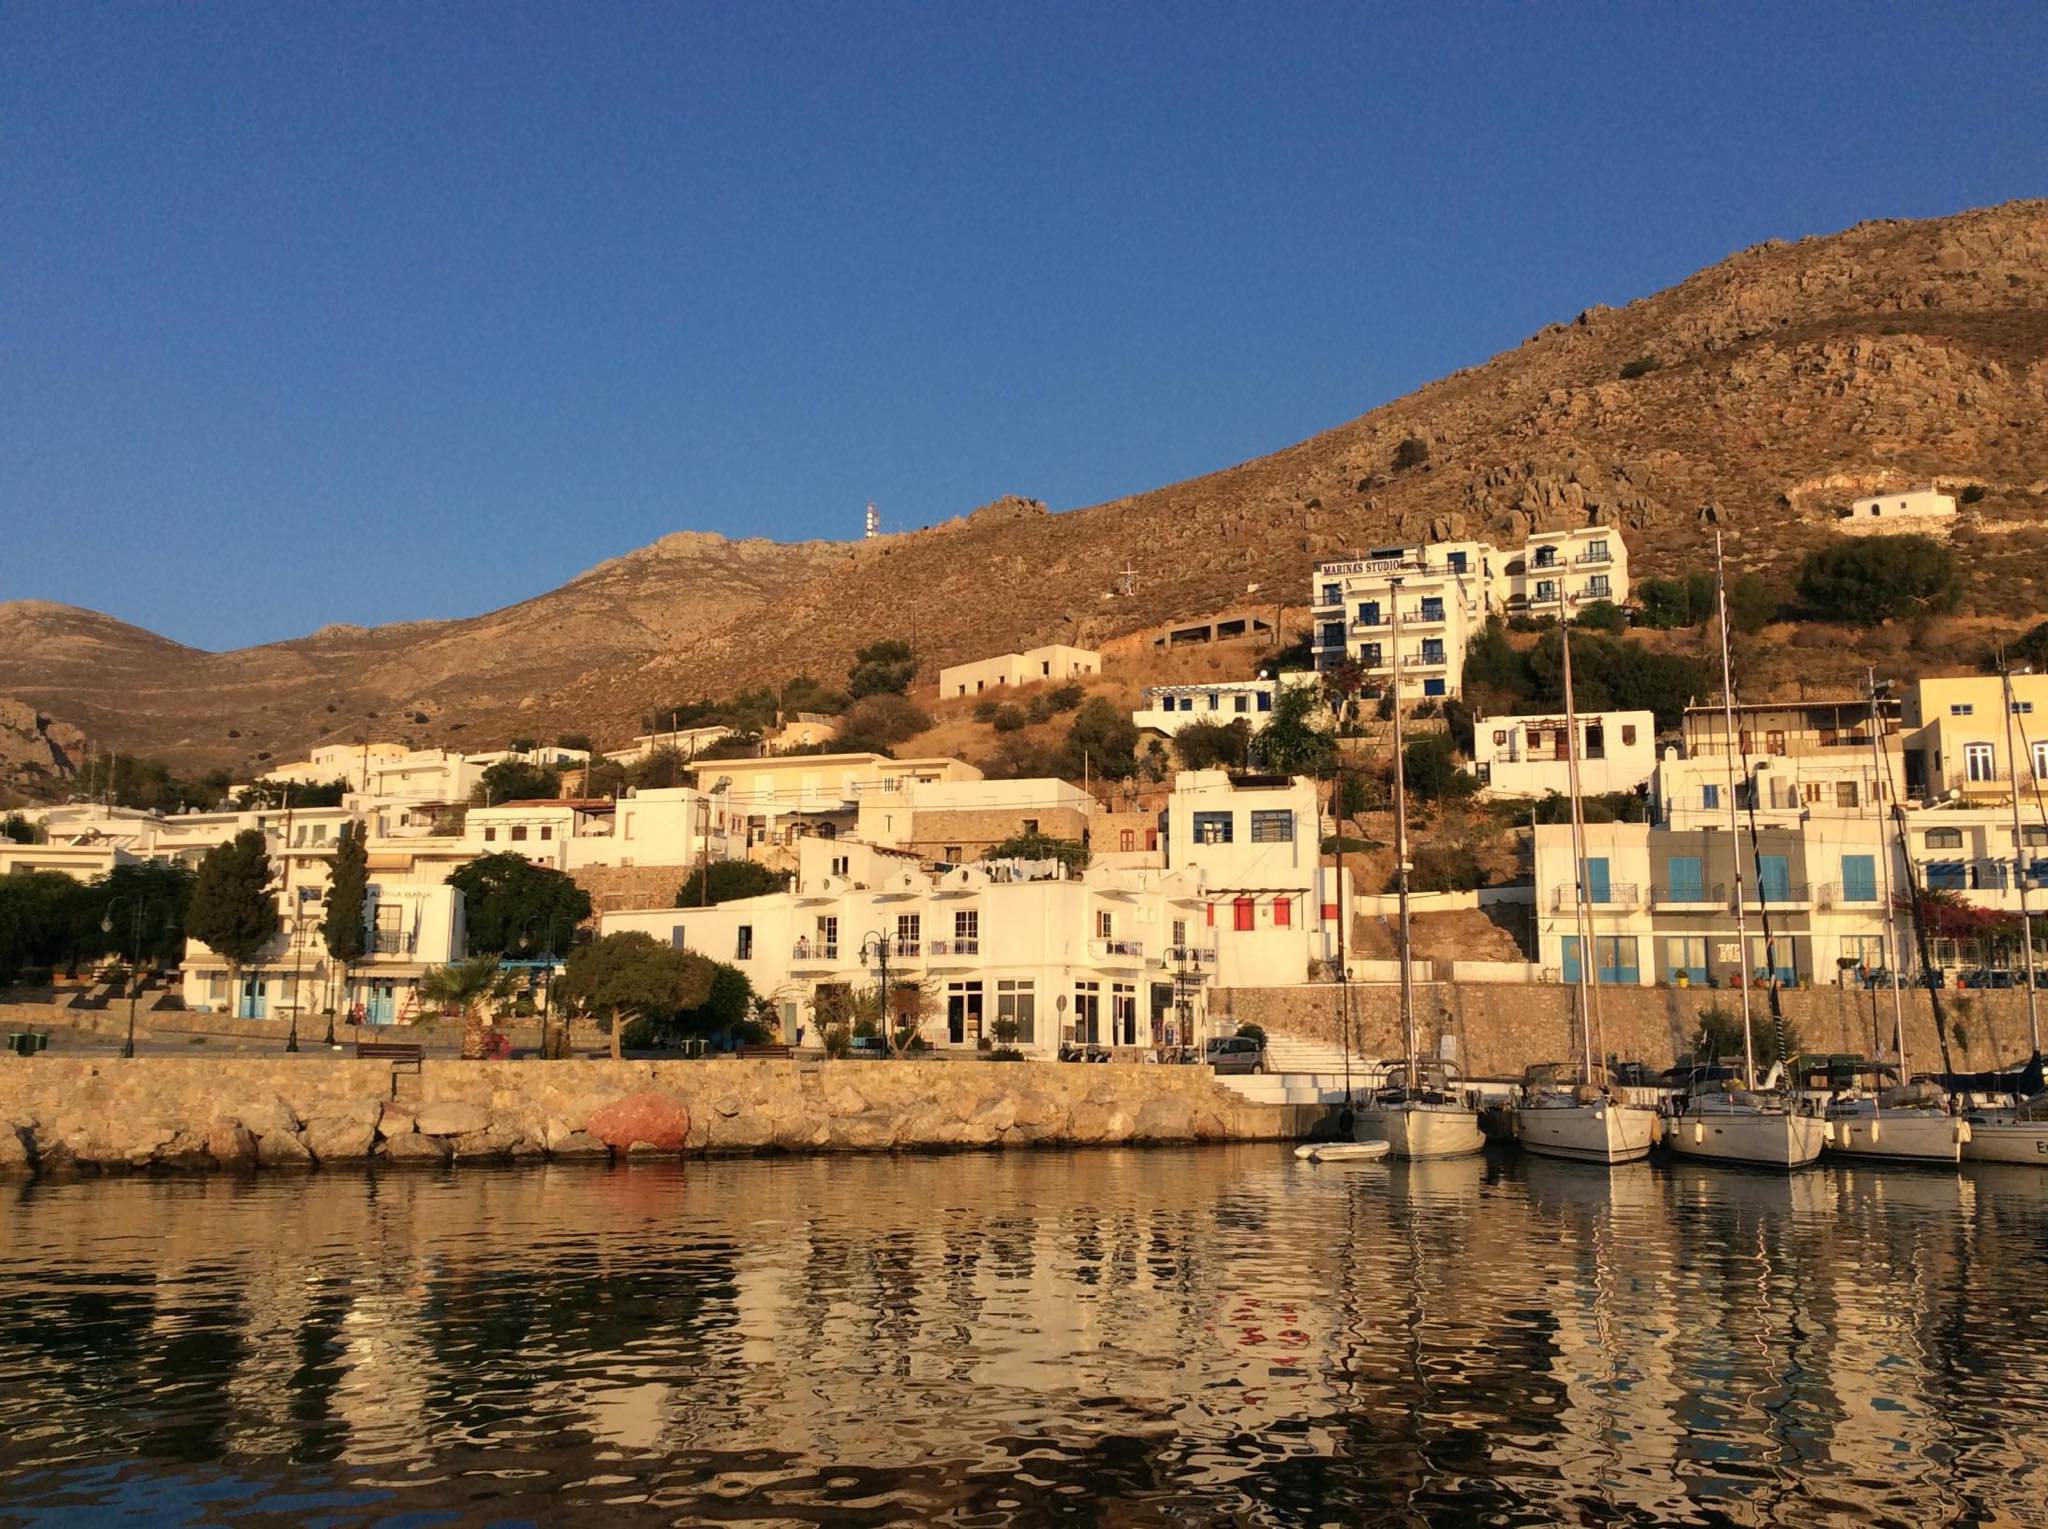 View of Tilos from Zeus Too, at sunset